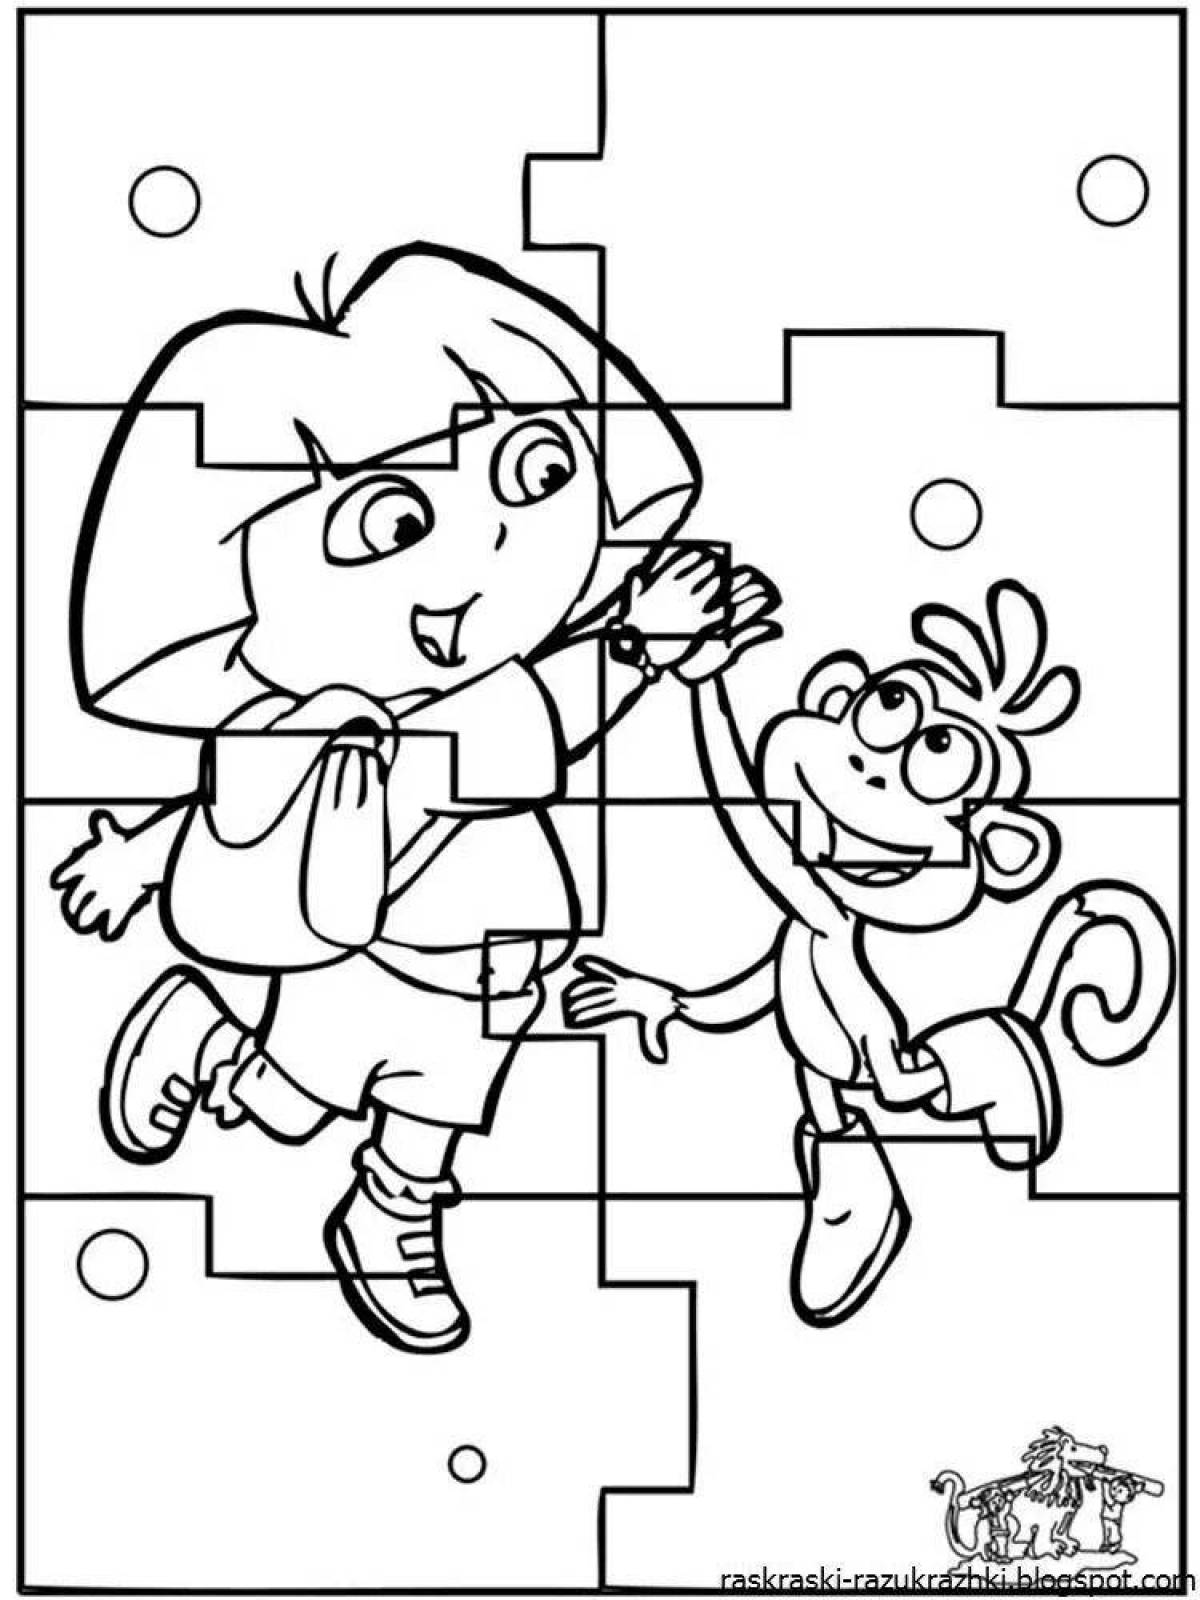 Intricate puzzle coloring pages